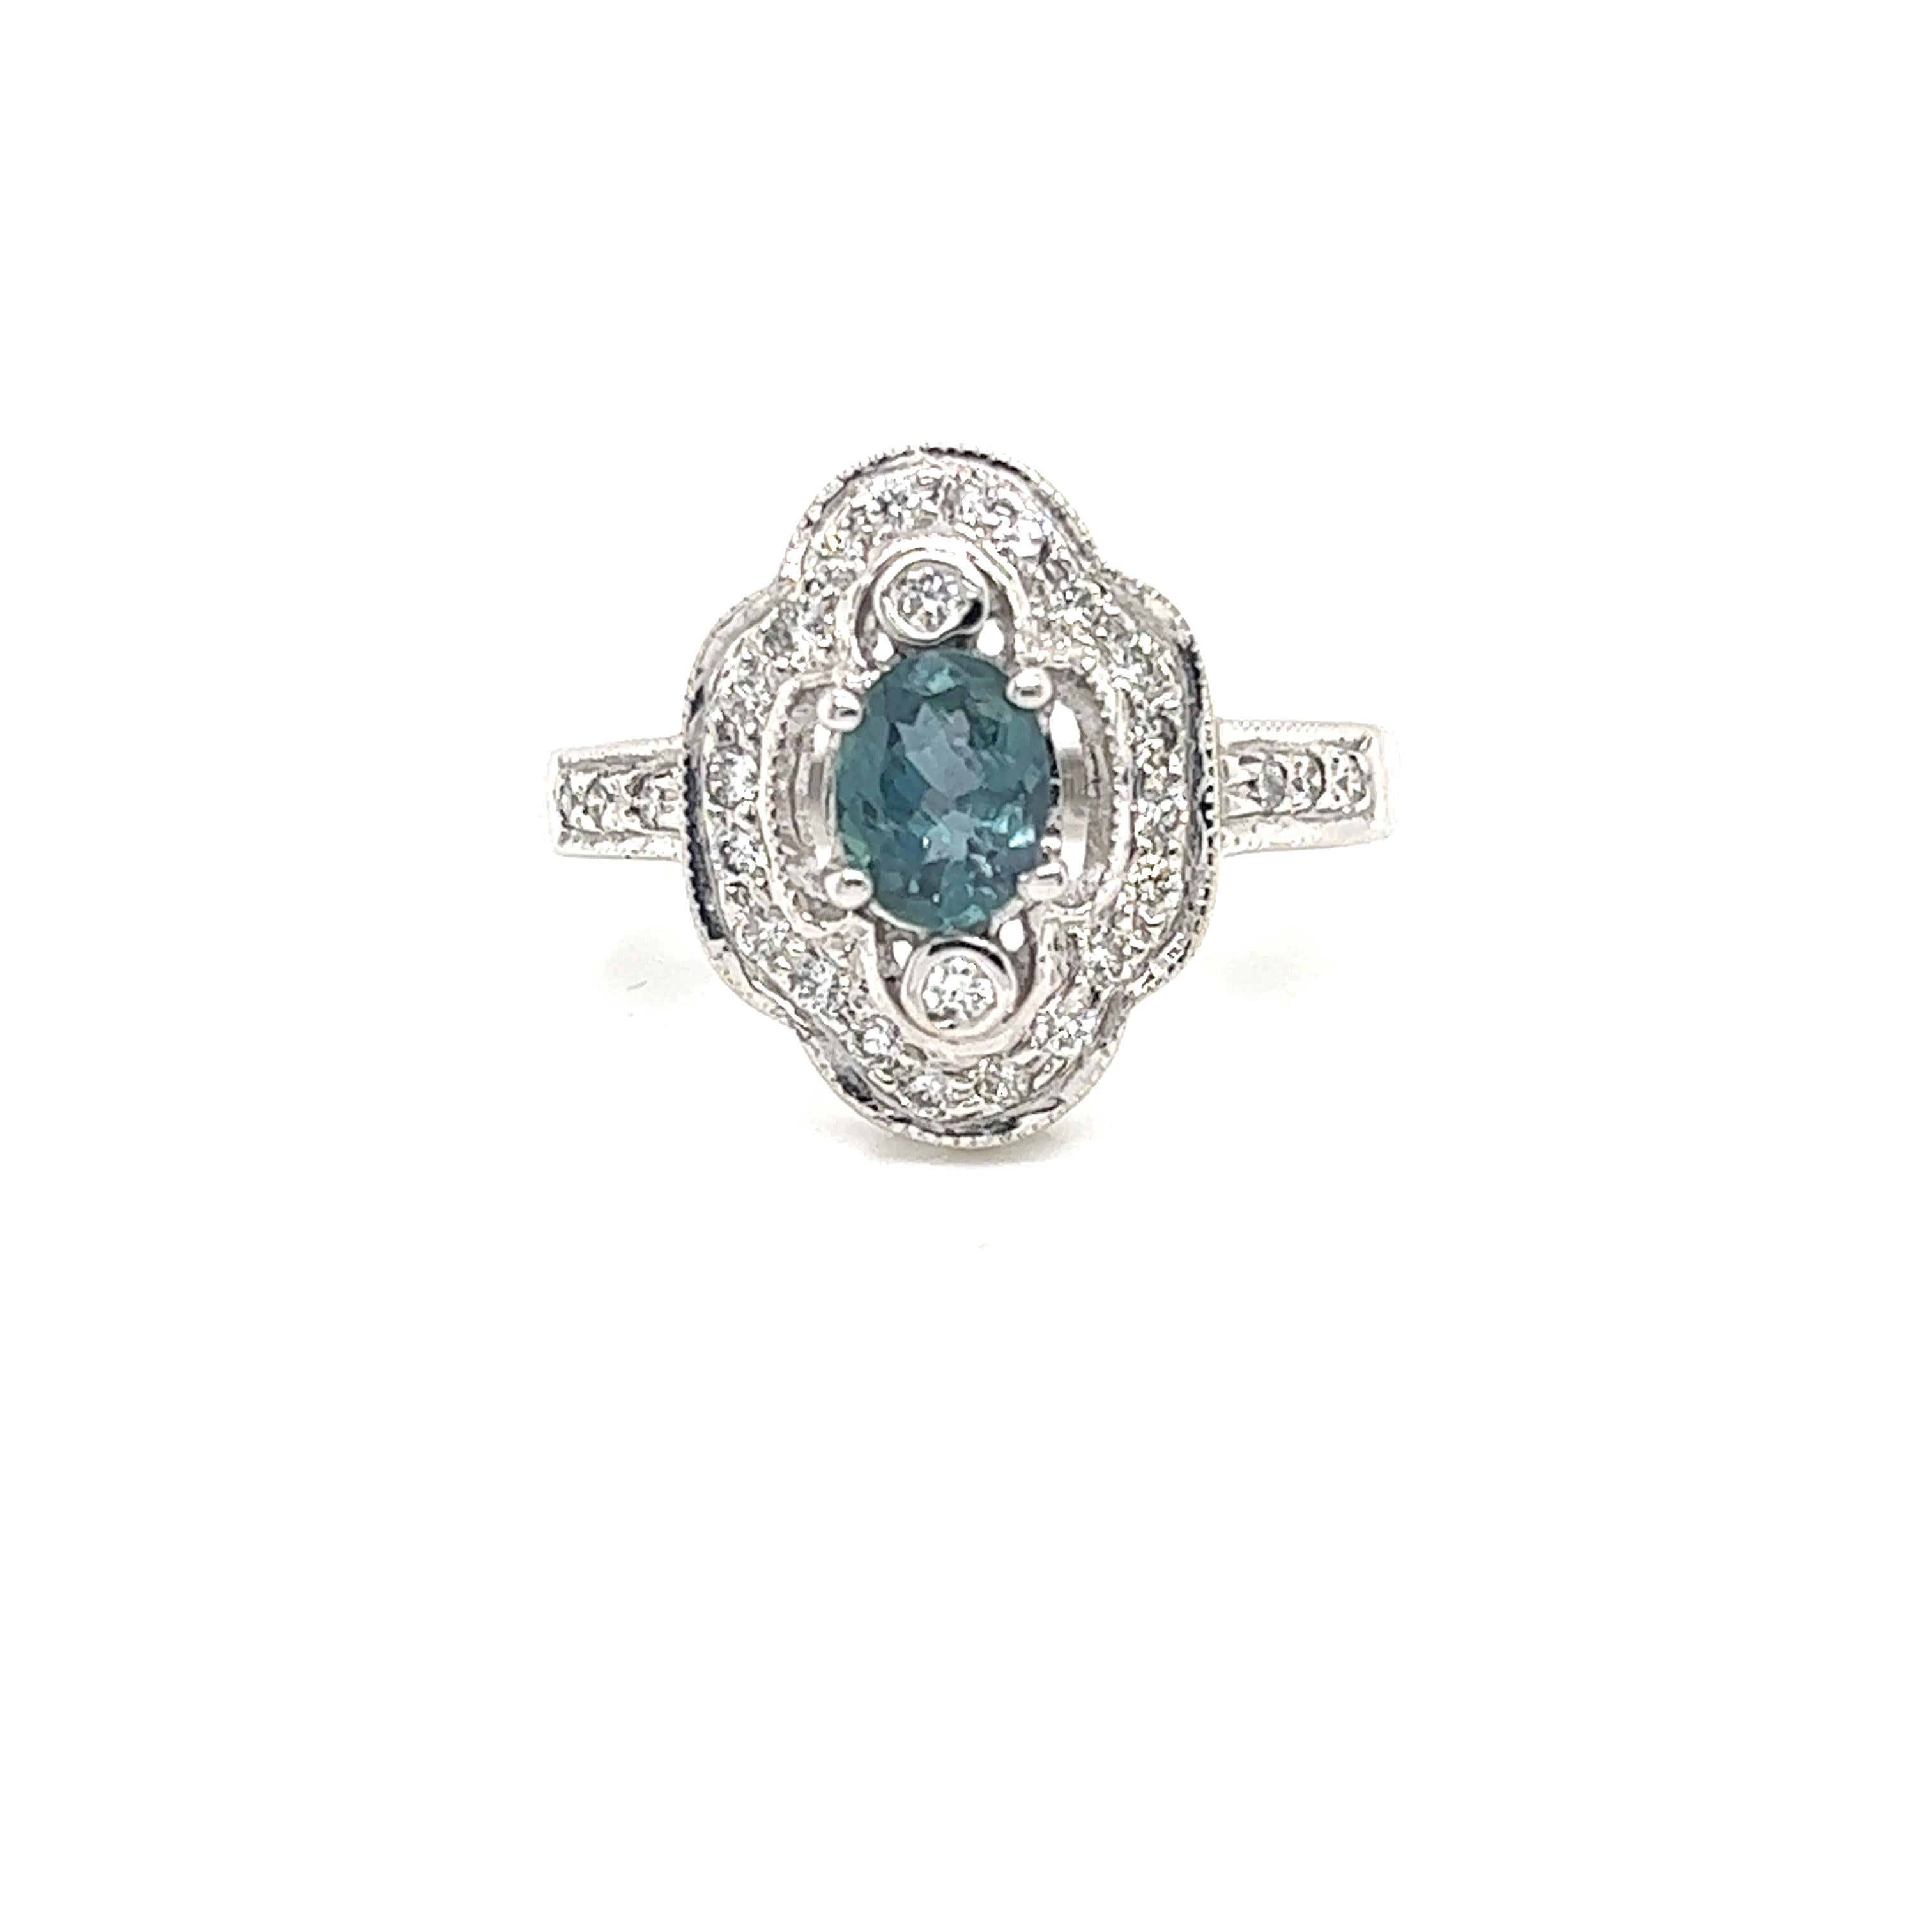 This is a gorgeous natural AAA quality oval Alexandrite surrounded by dainty diamonds that are set in a vintage white gold setting. This ring features a natural 0.75 carat oval alexandrite that is certified by the Gemological Institute of America